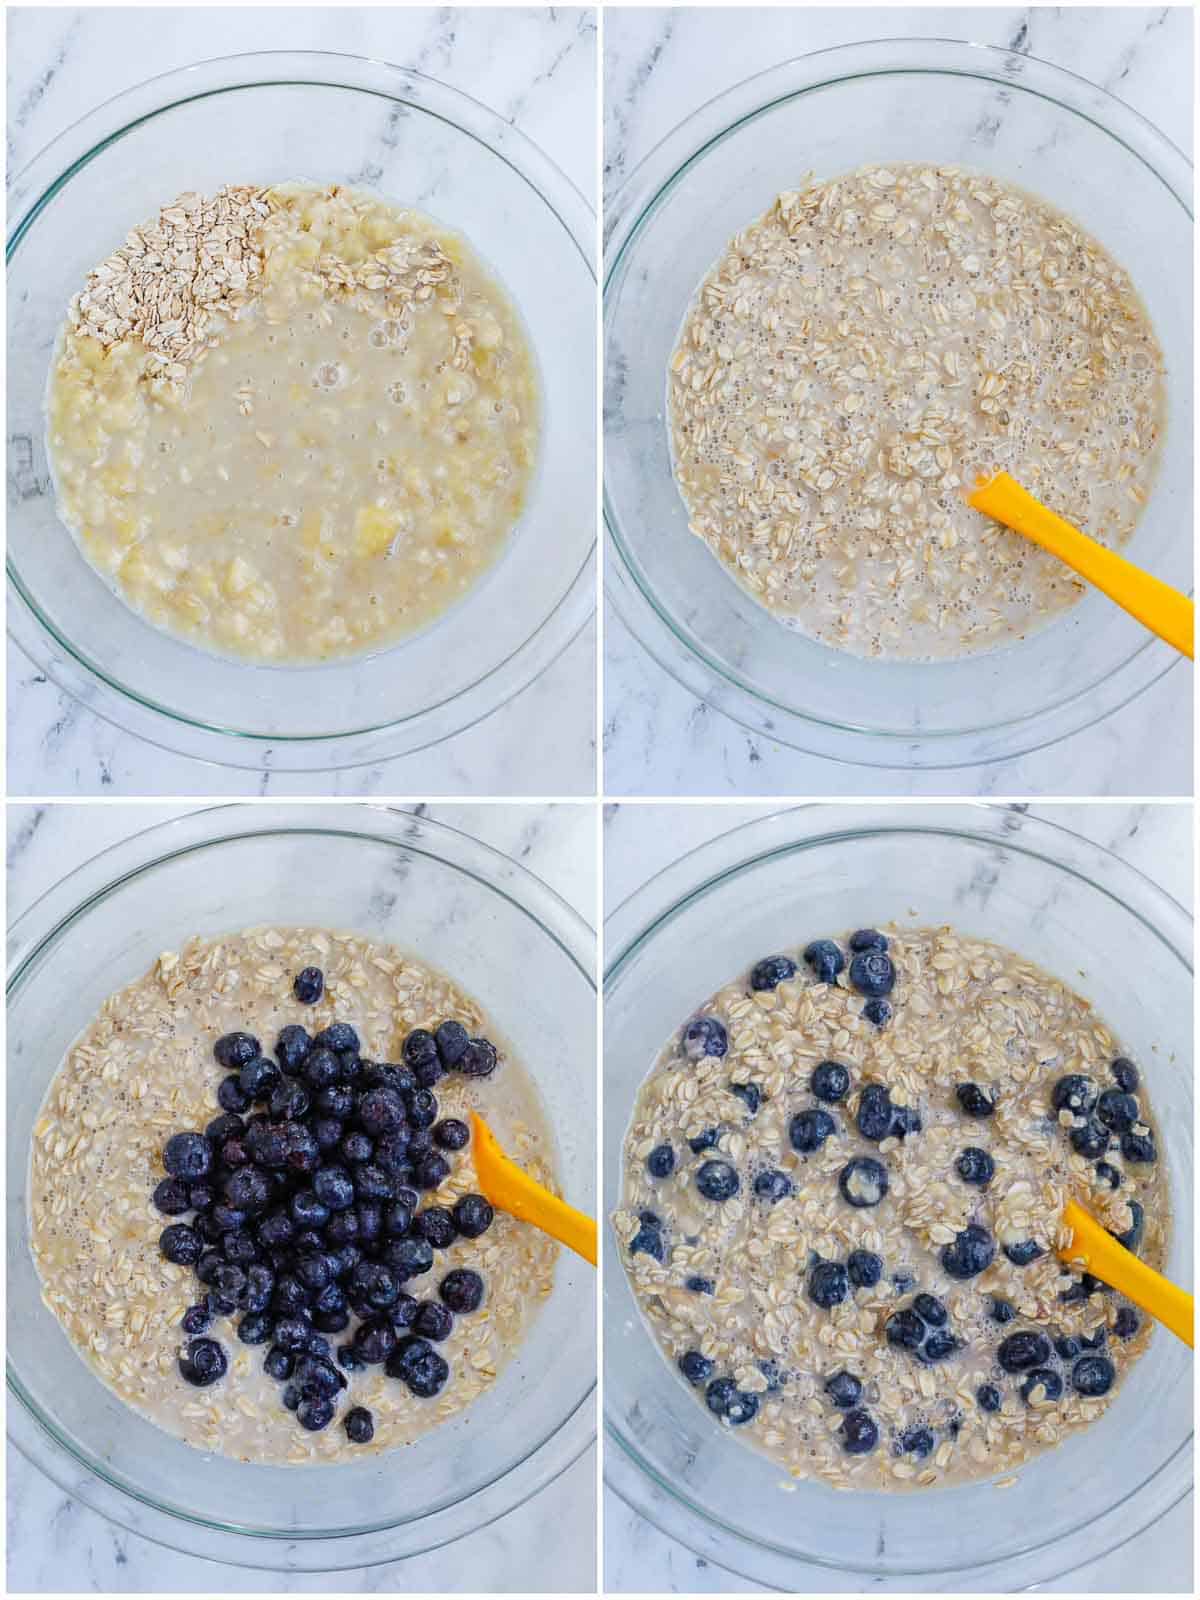 mixing the wet ingredients with blueberry together to make the baked oatmeal 